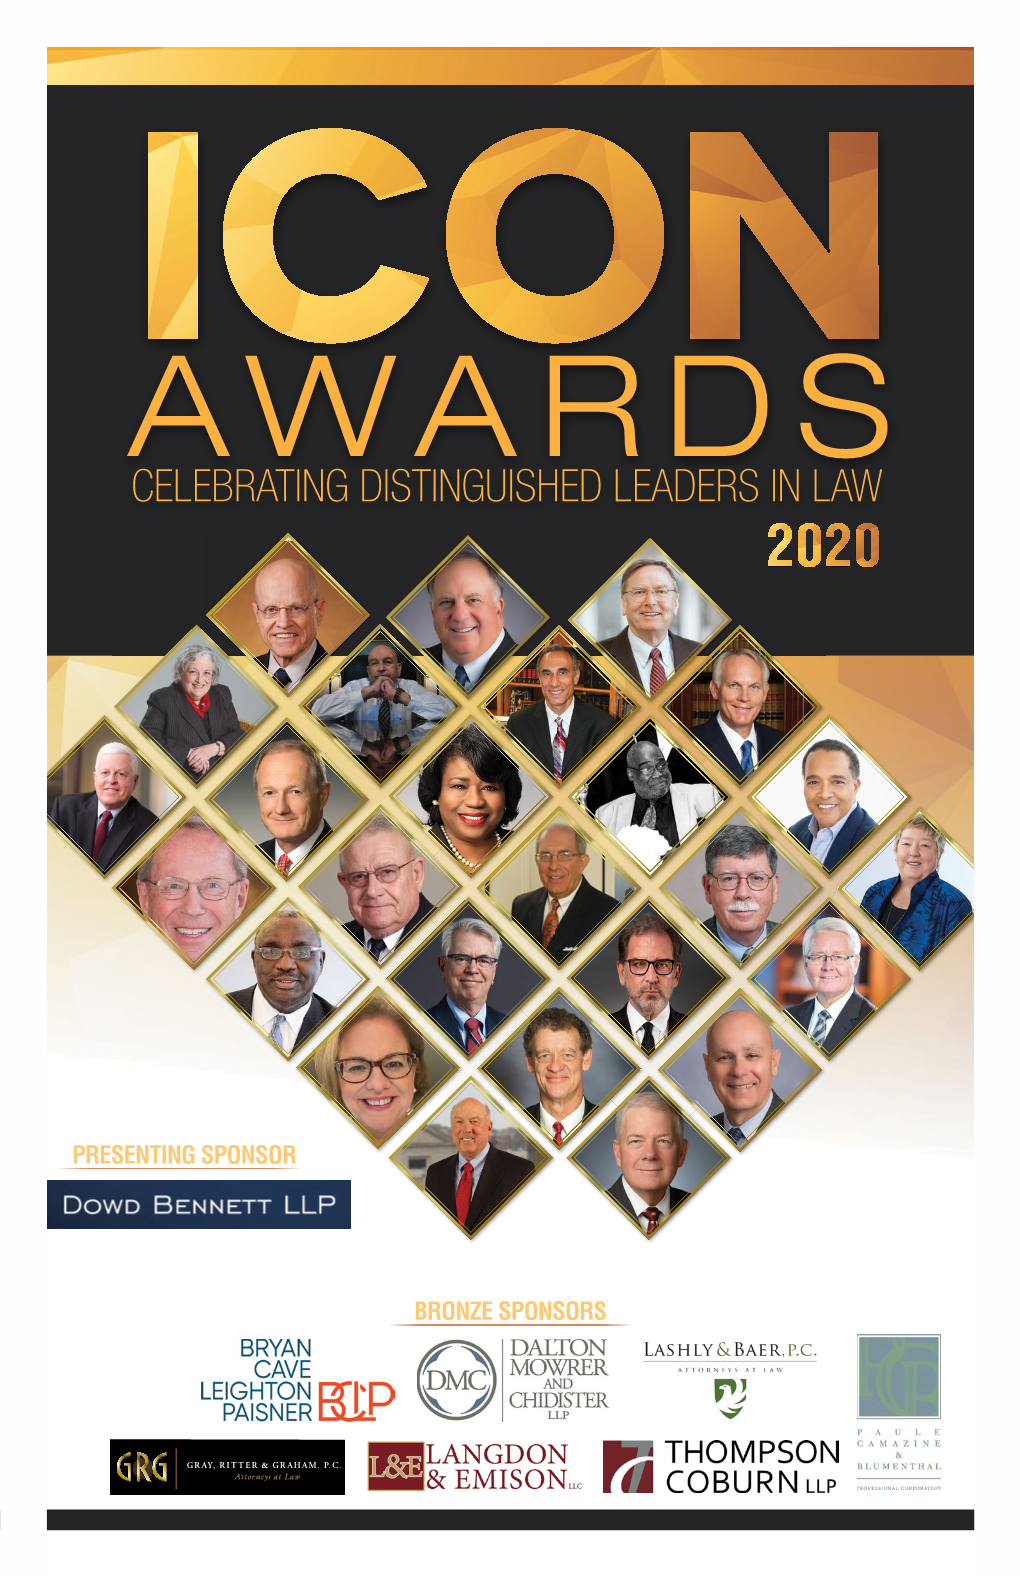 Celebrating Distinguished Leaders in Law